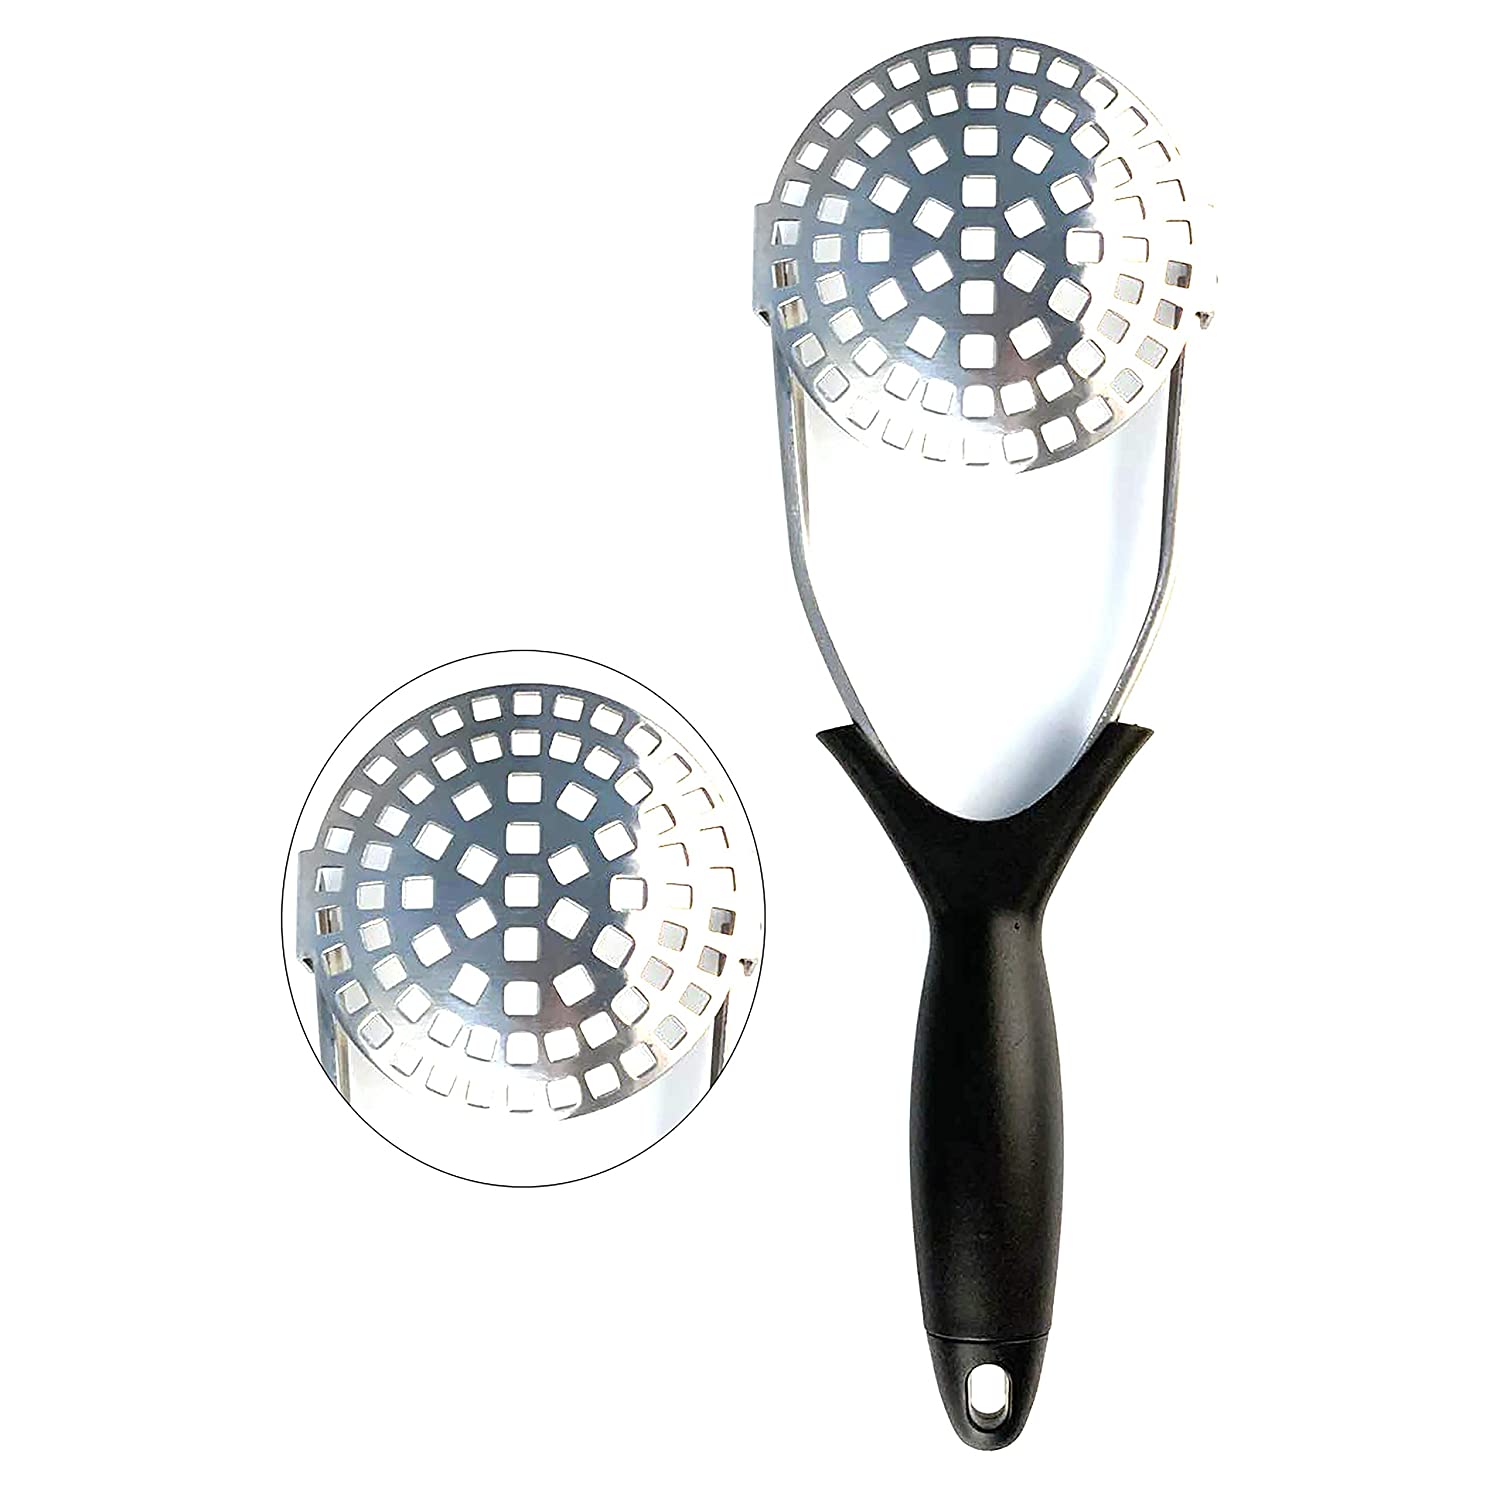 1pc 430 Large Stainless Steel Potato Masher, Extra Strength Bean